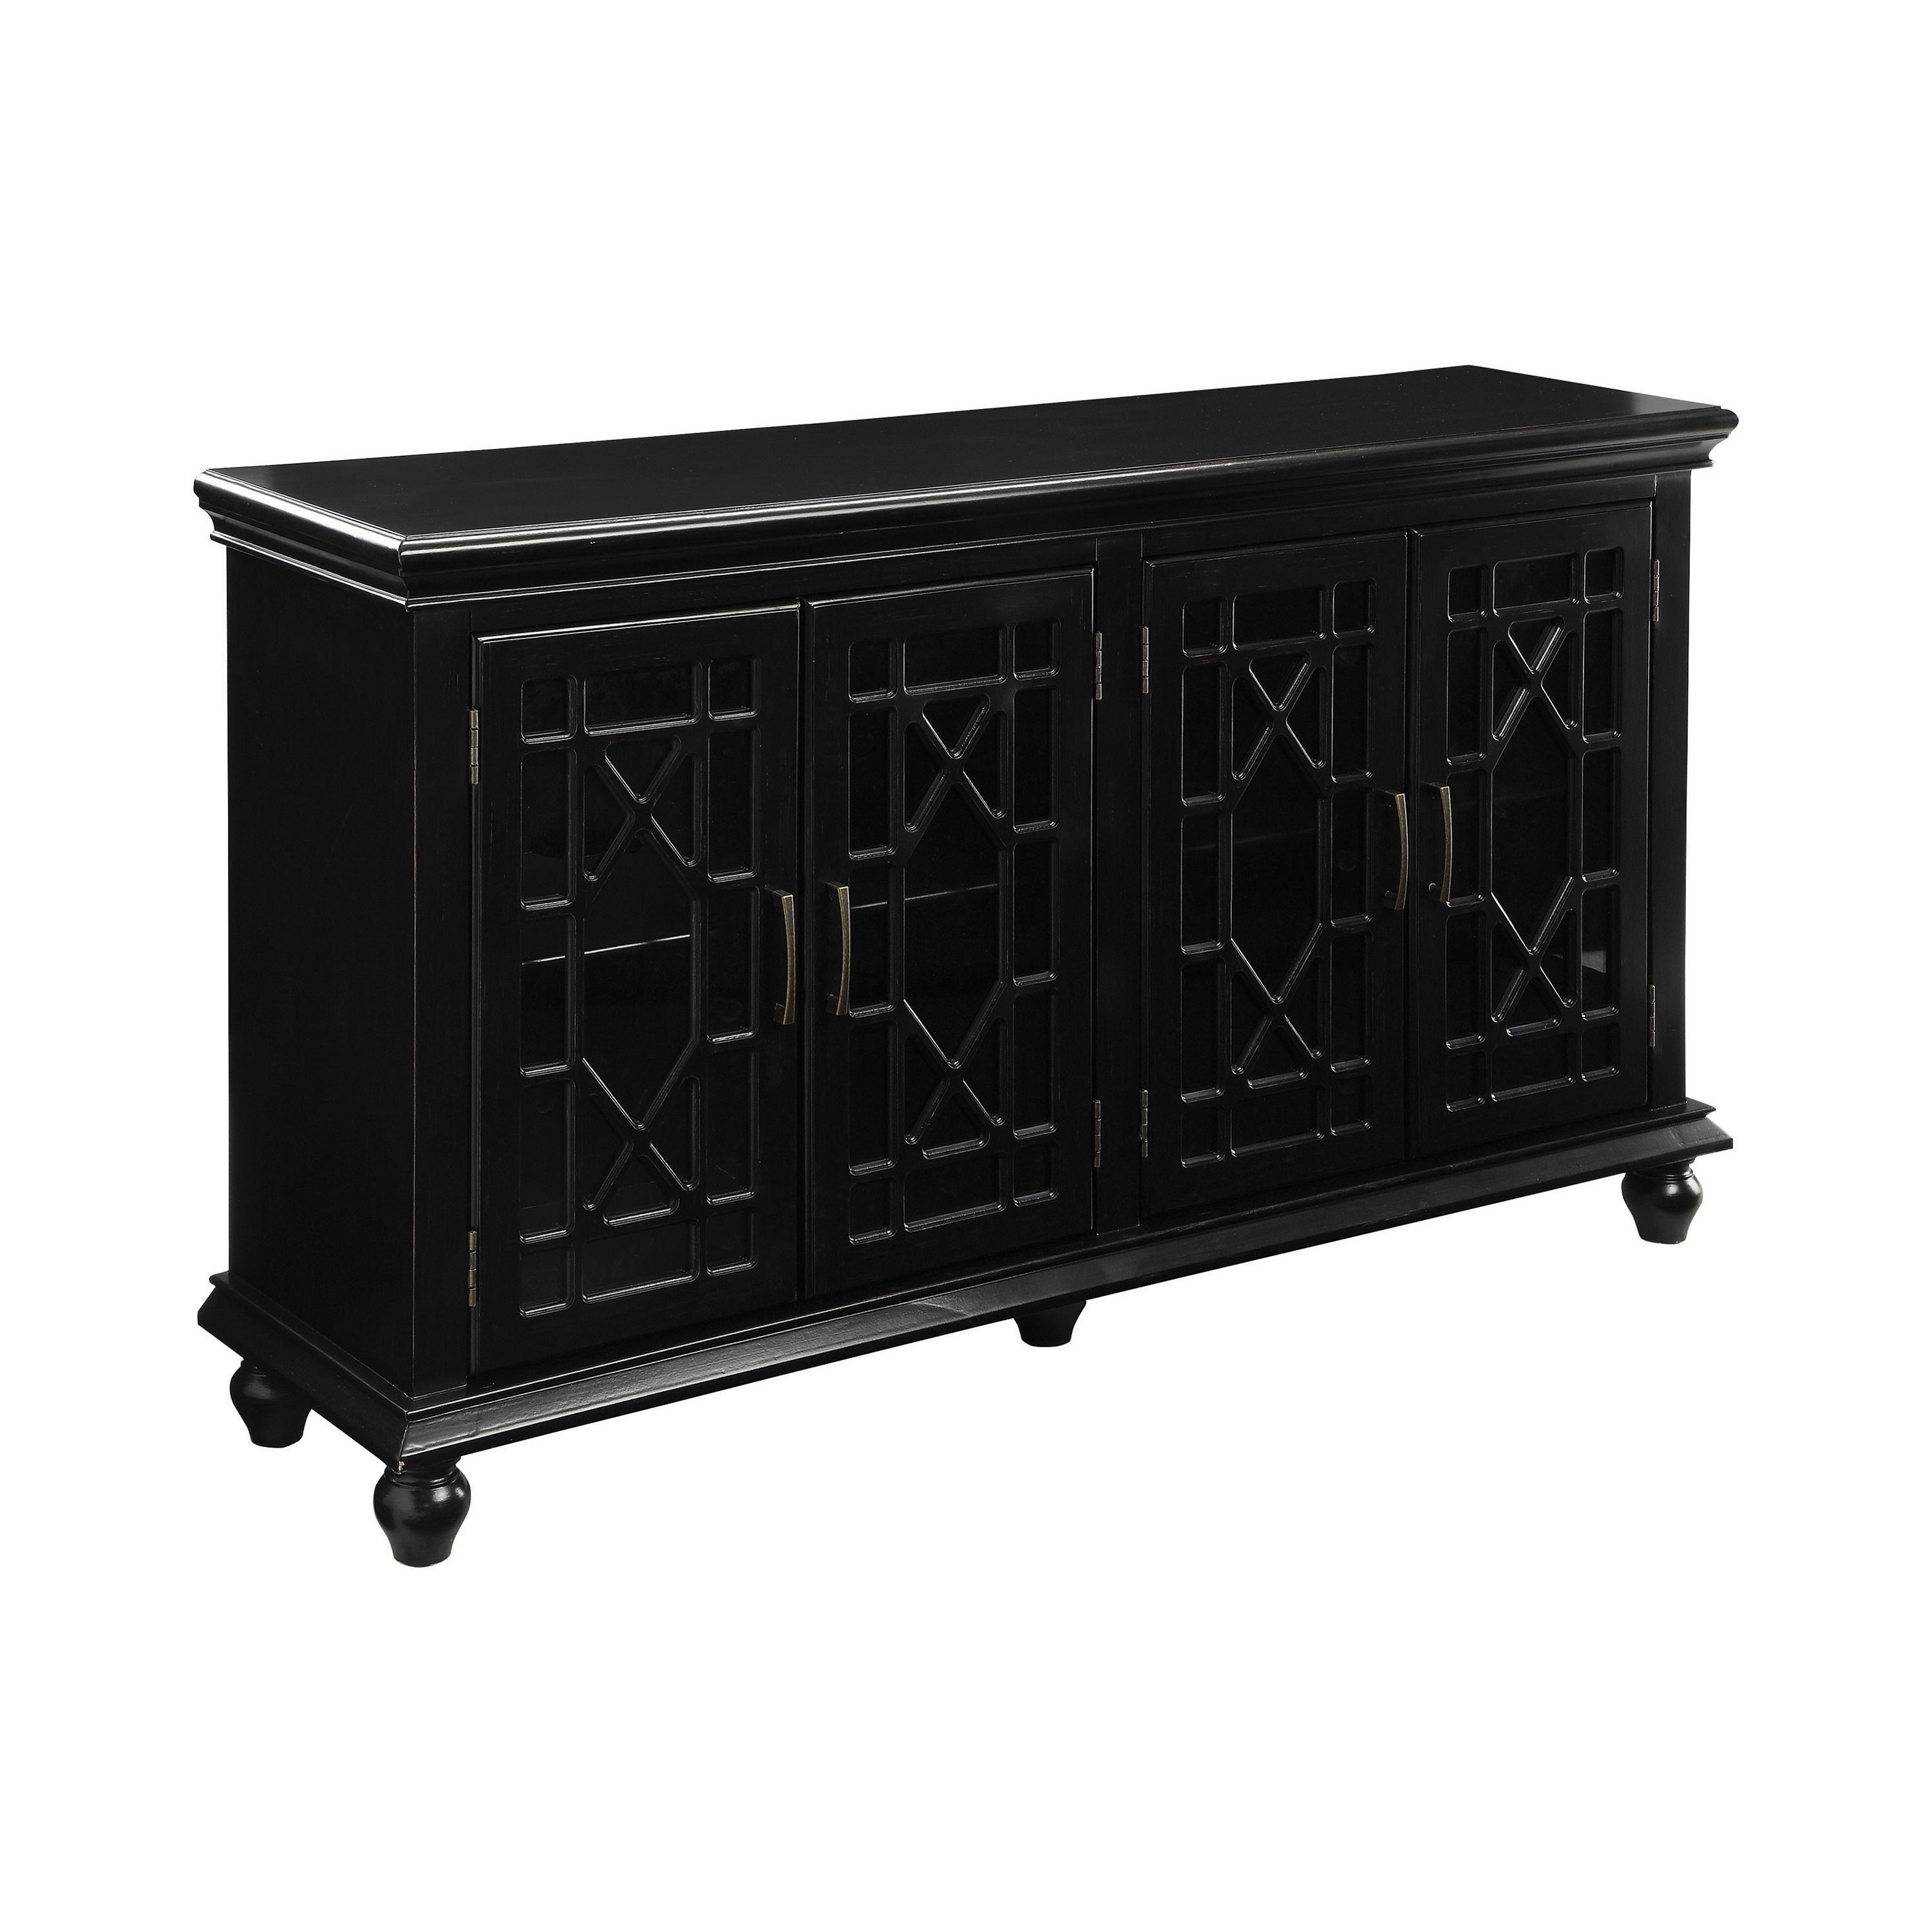 Transitional Accent Cabinet 950639 950639 in Black 